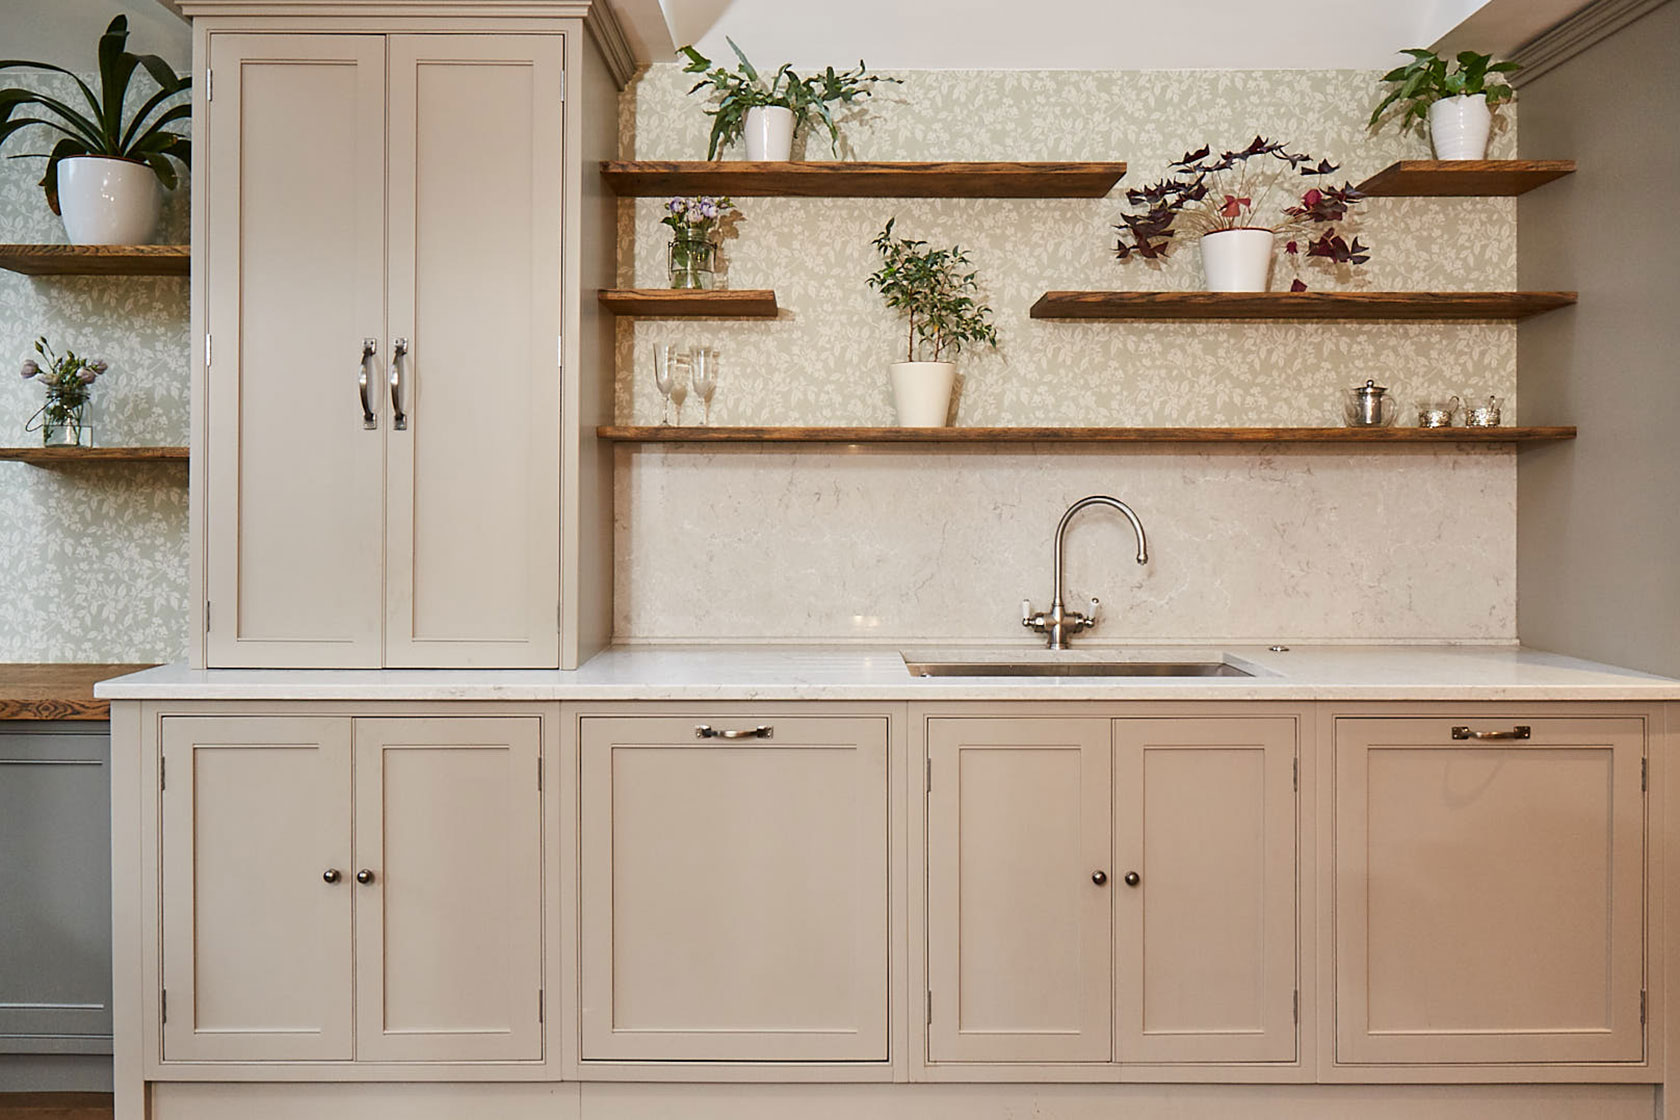 Traditional kitchen sink run with open oak shelves and green wallpaper